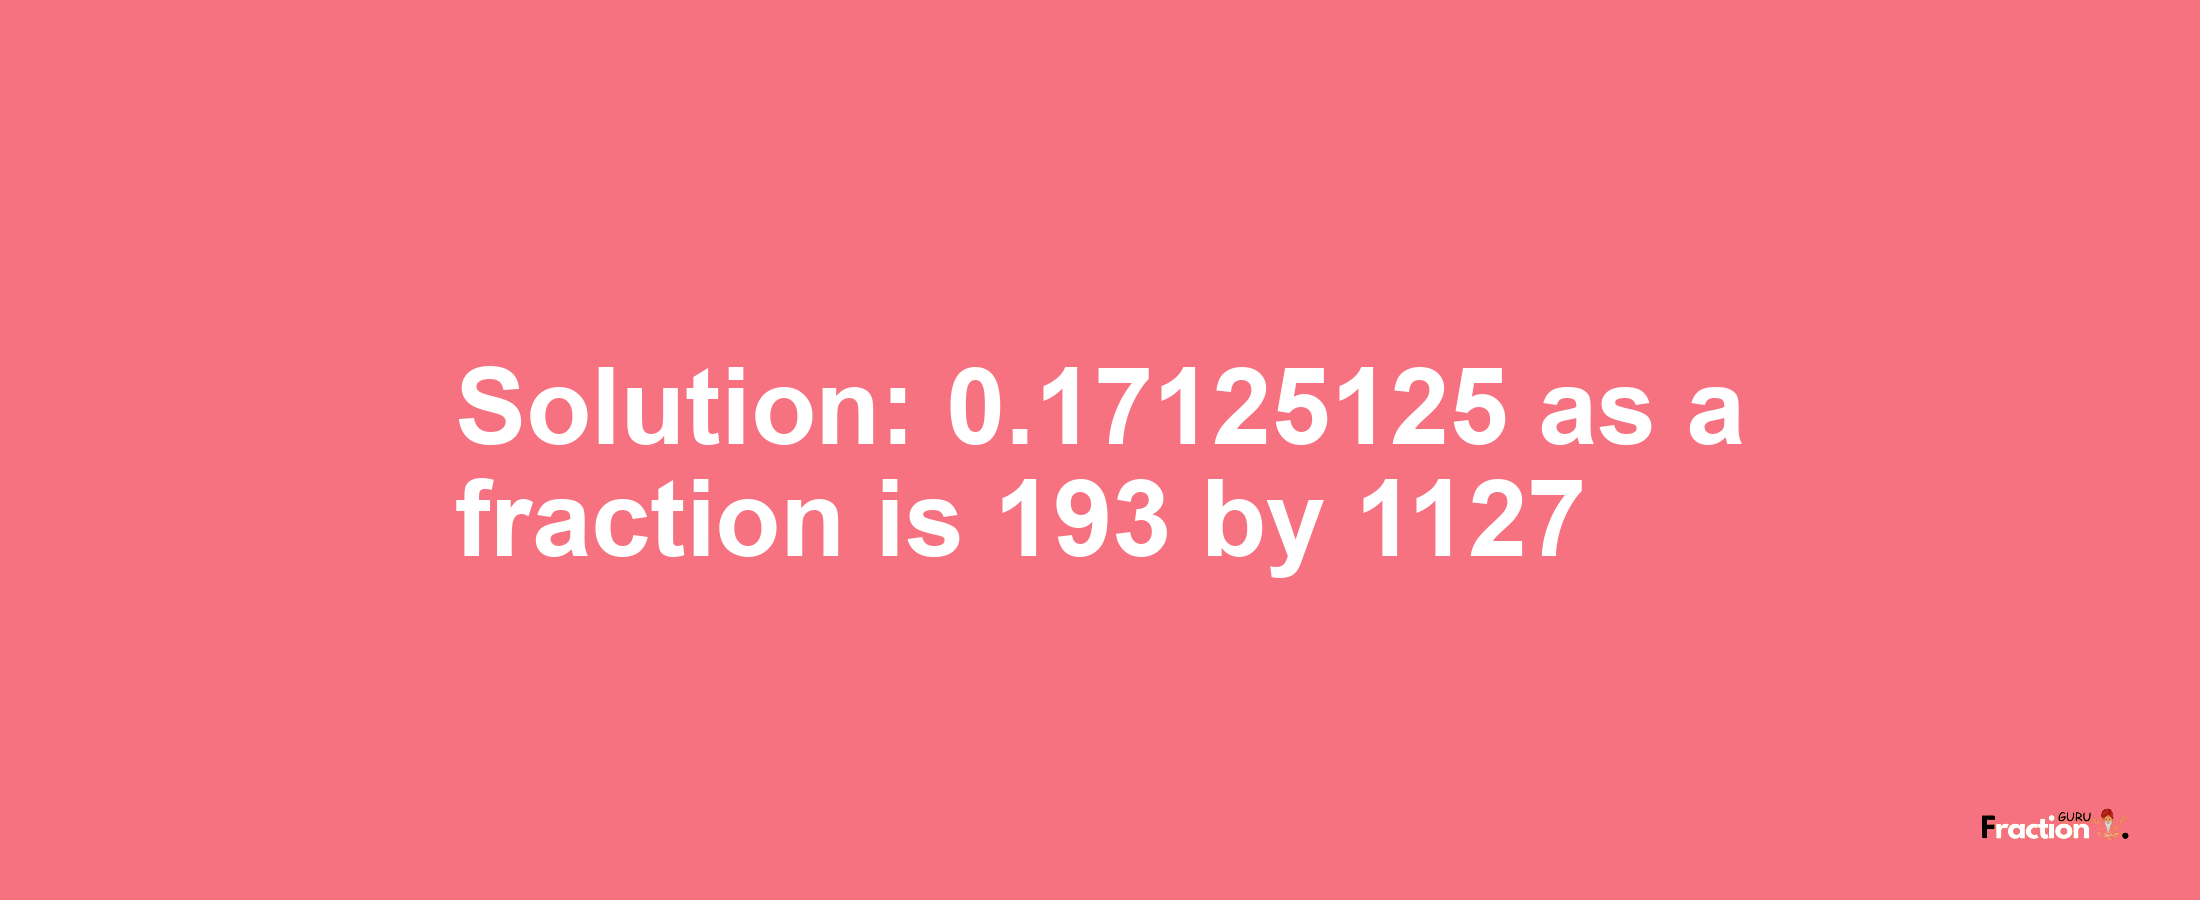 Solution:0.17125125 as a fraction is 193/1127